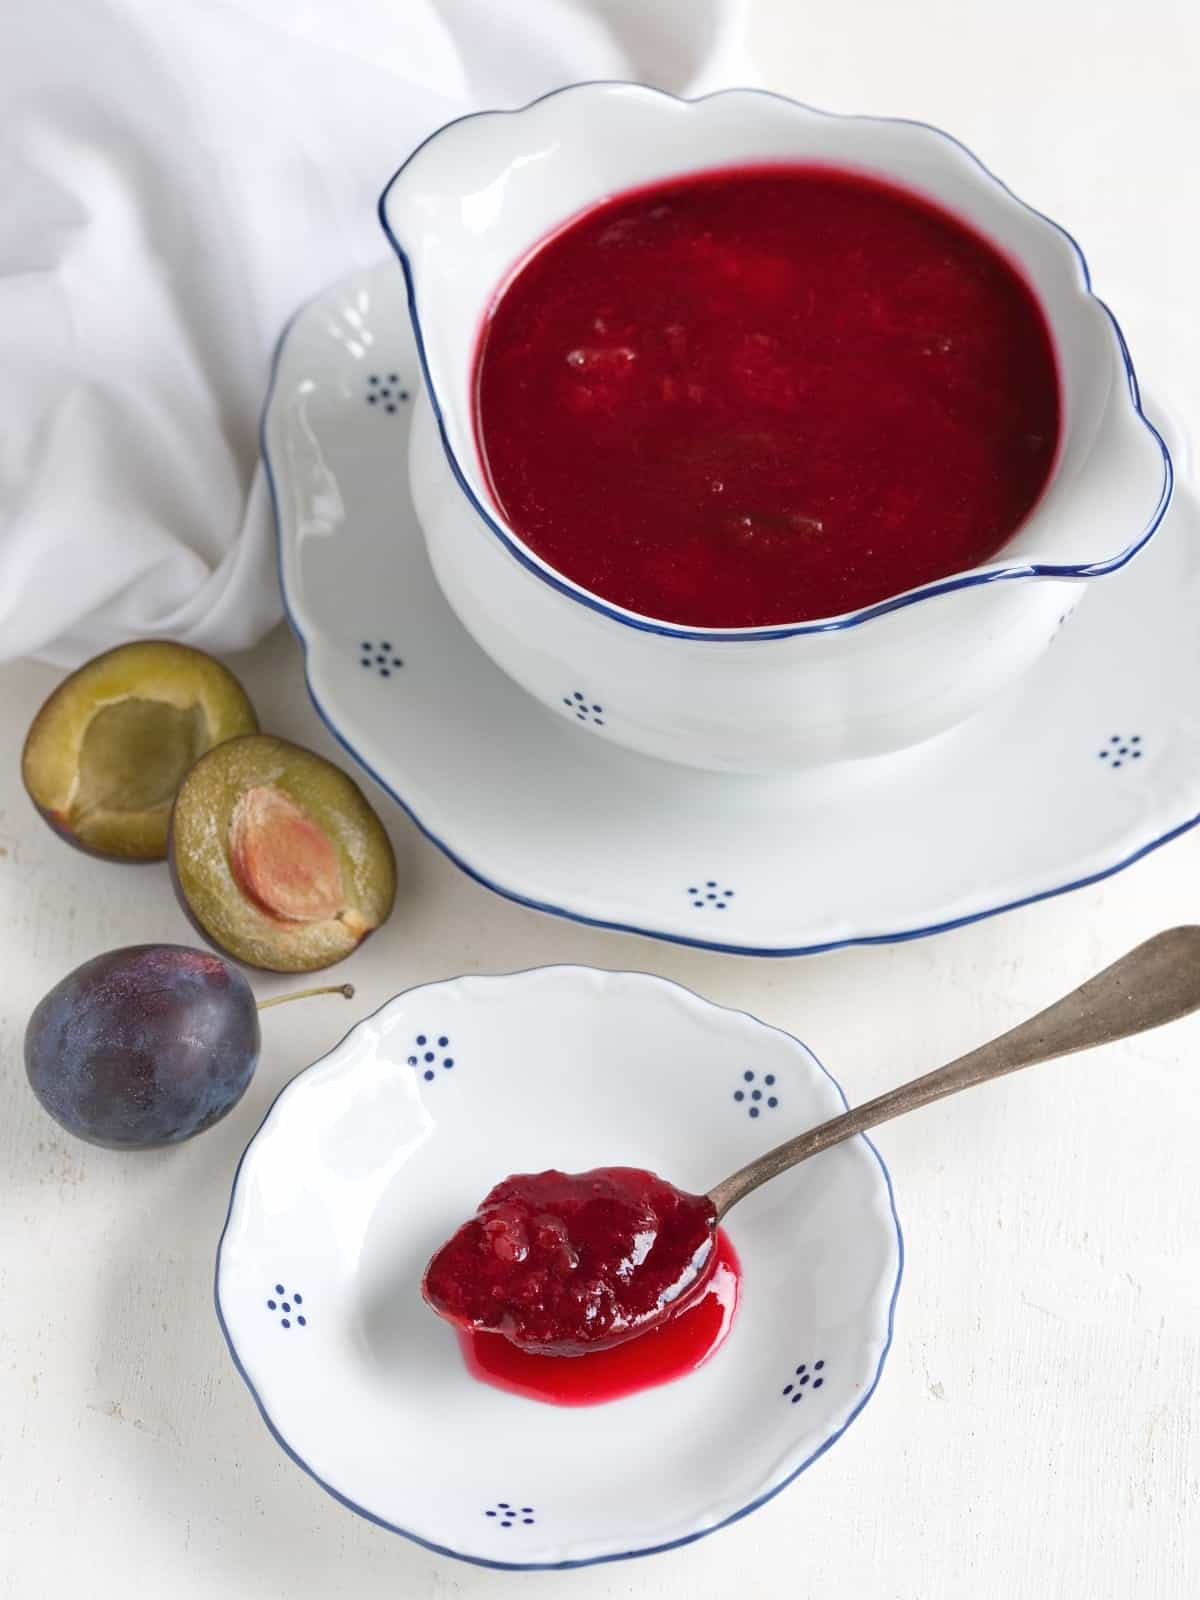 Czech klevela plum compote served in a cup.